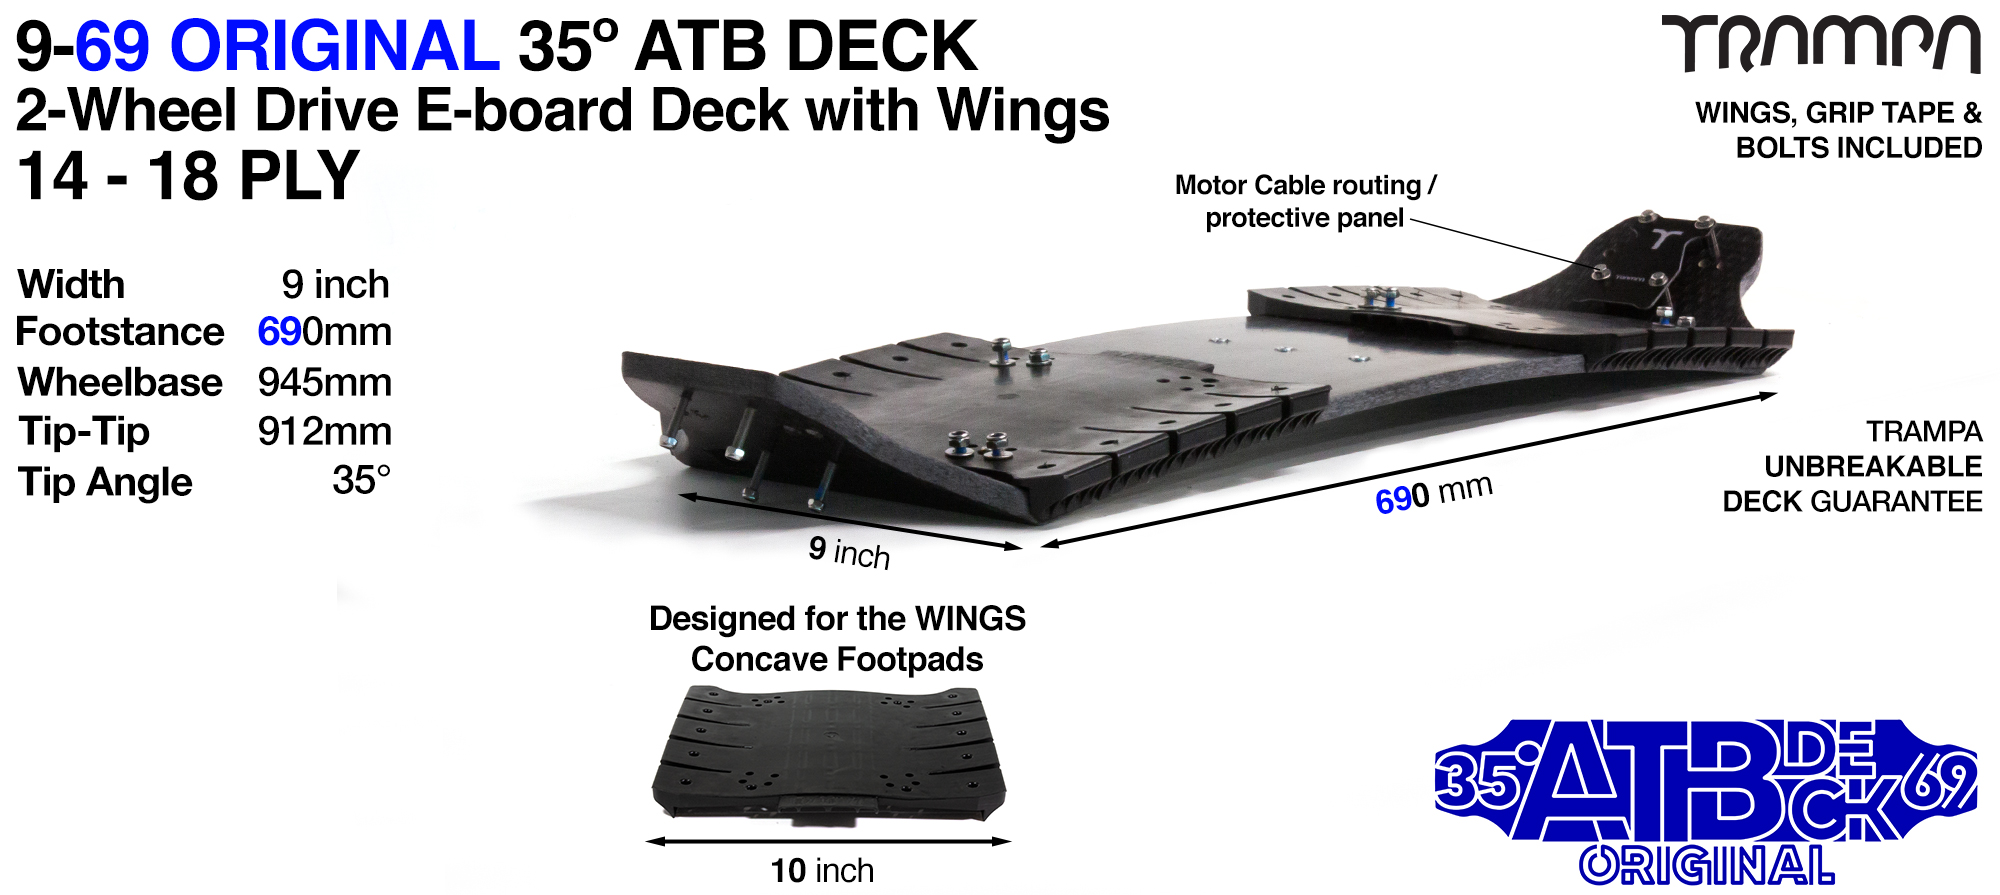 TRAMPA 35° 9/69 2WD Electric Mountainboard Deck with WINGS - WINGS give safe cable routing, adds W Shaped concave & the increase the width of the deck from 9 to 10 Inches